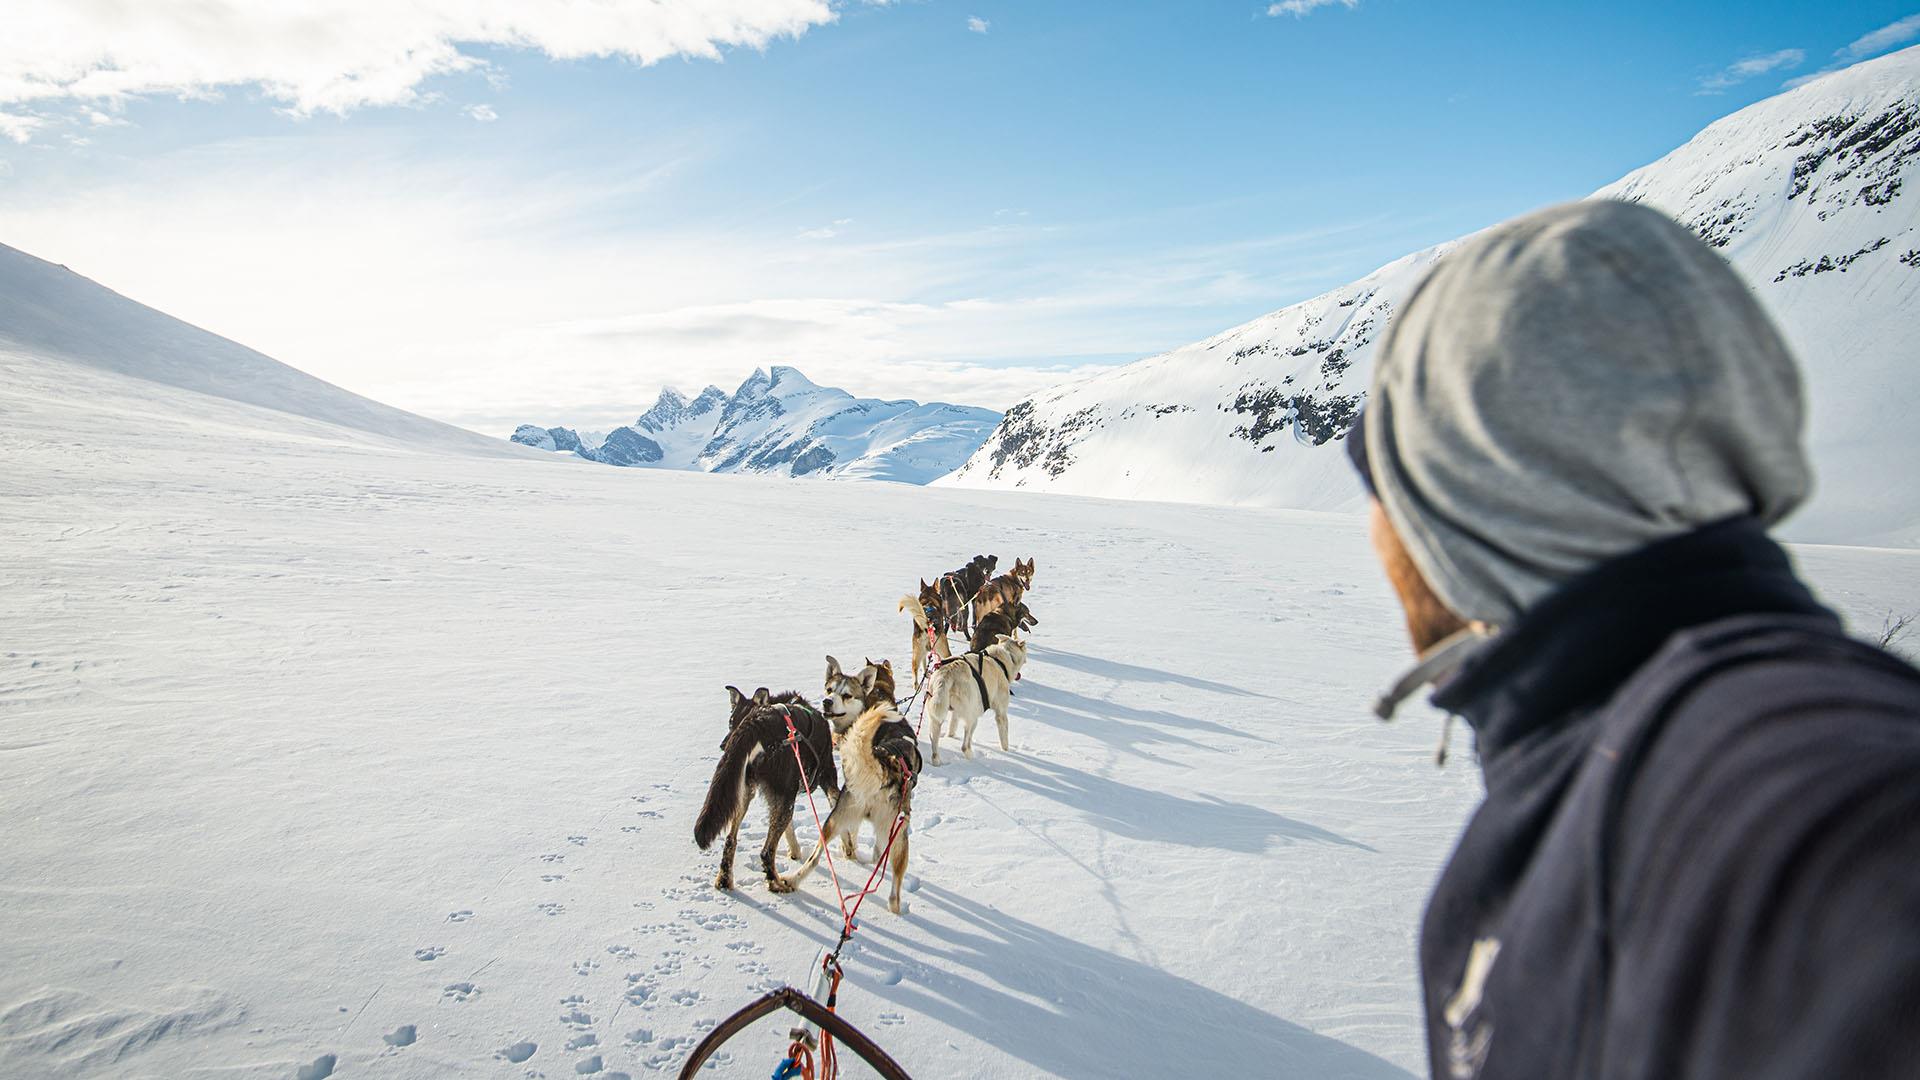 A dog sledding team in winter mountain landscape with a massif of pointed, alpine peaks in the background.